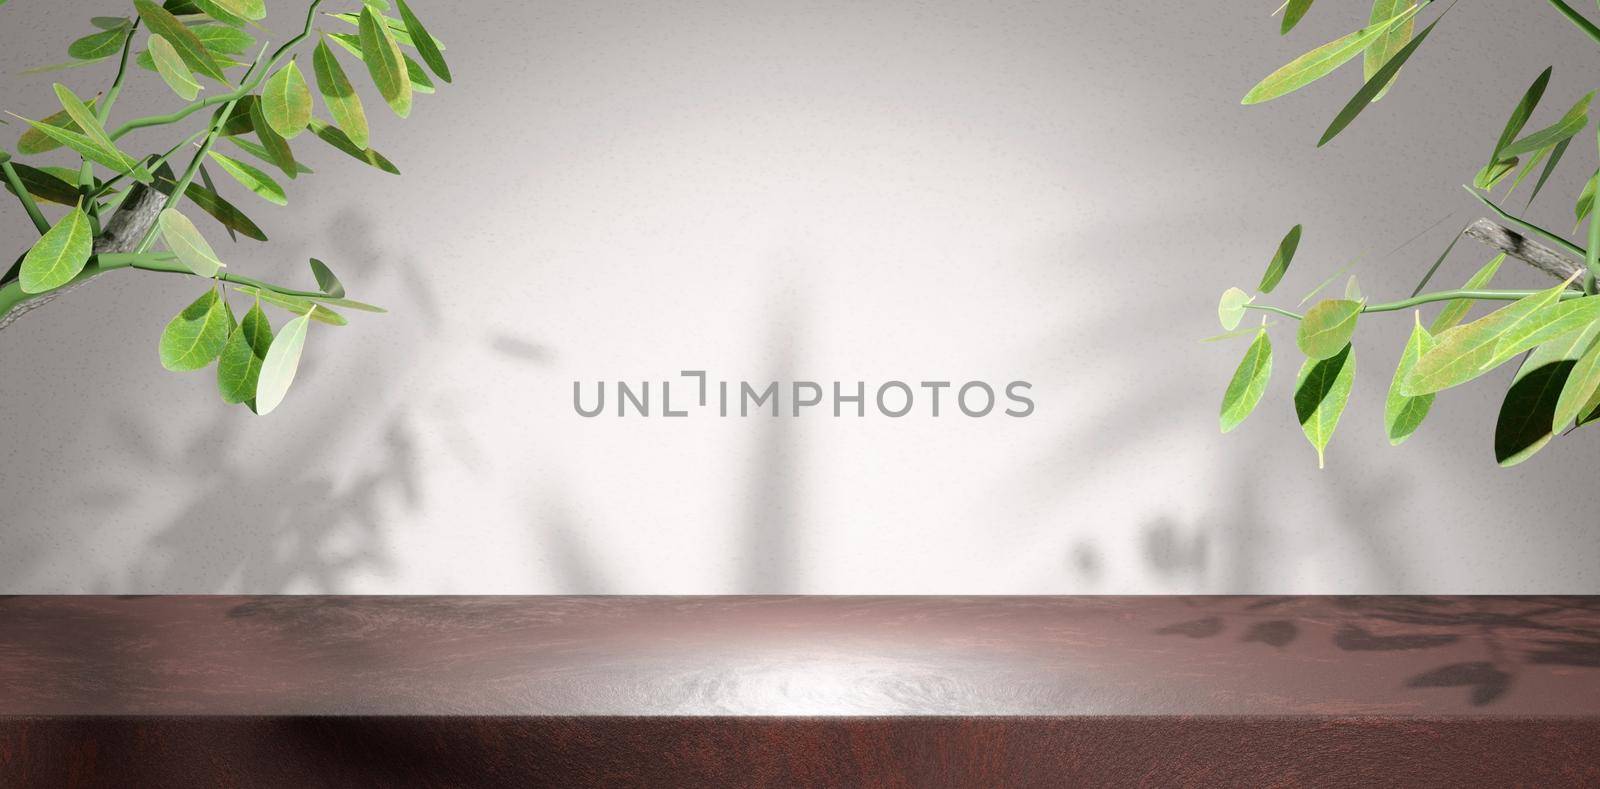 Empty Red Stone Table Top For Brand Exhibit. Abstract Plain Wall Background With Tropical Leaves On the Side And Shadow Leaf Effect. 3D Render Illustration by yay_lmrb